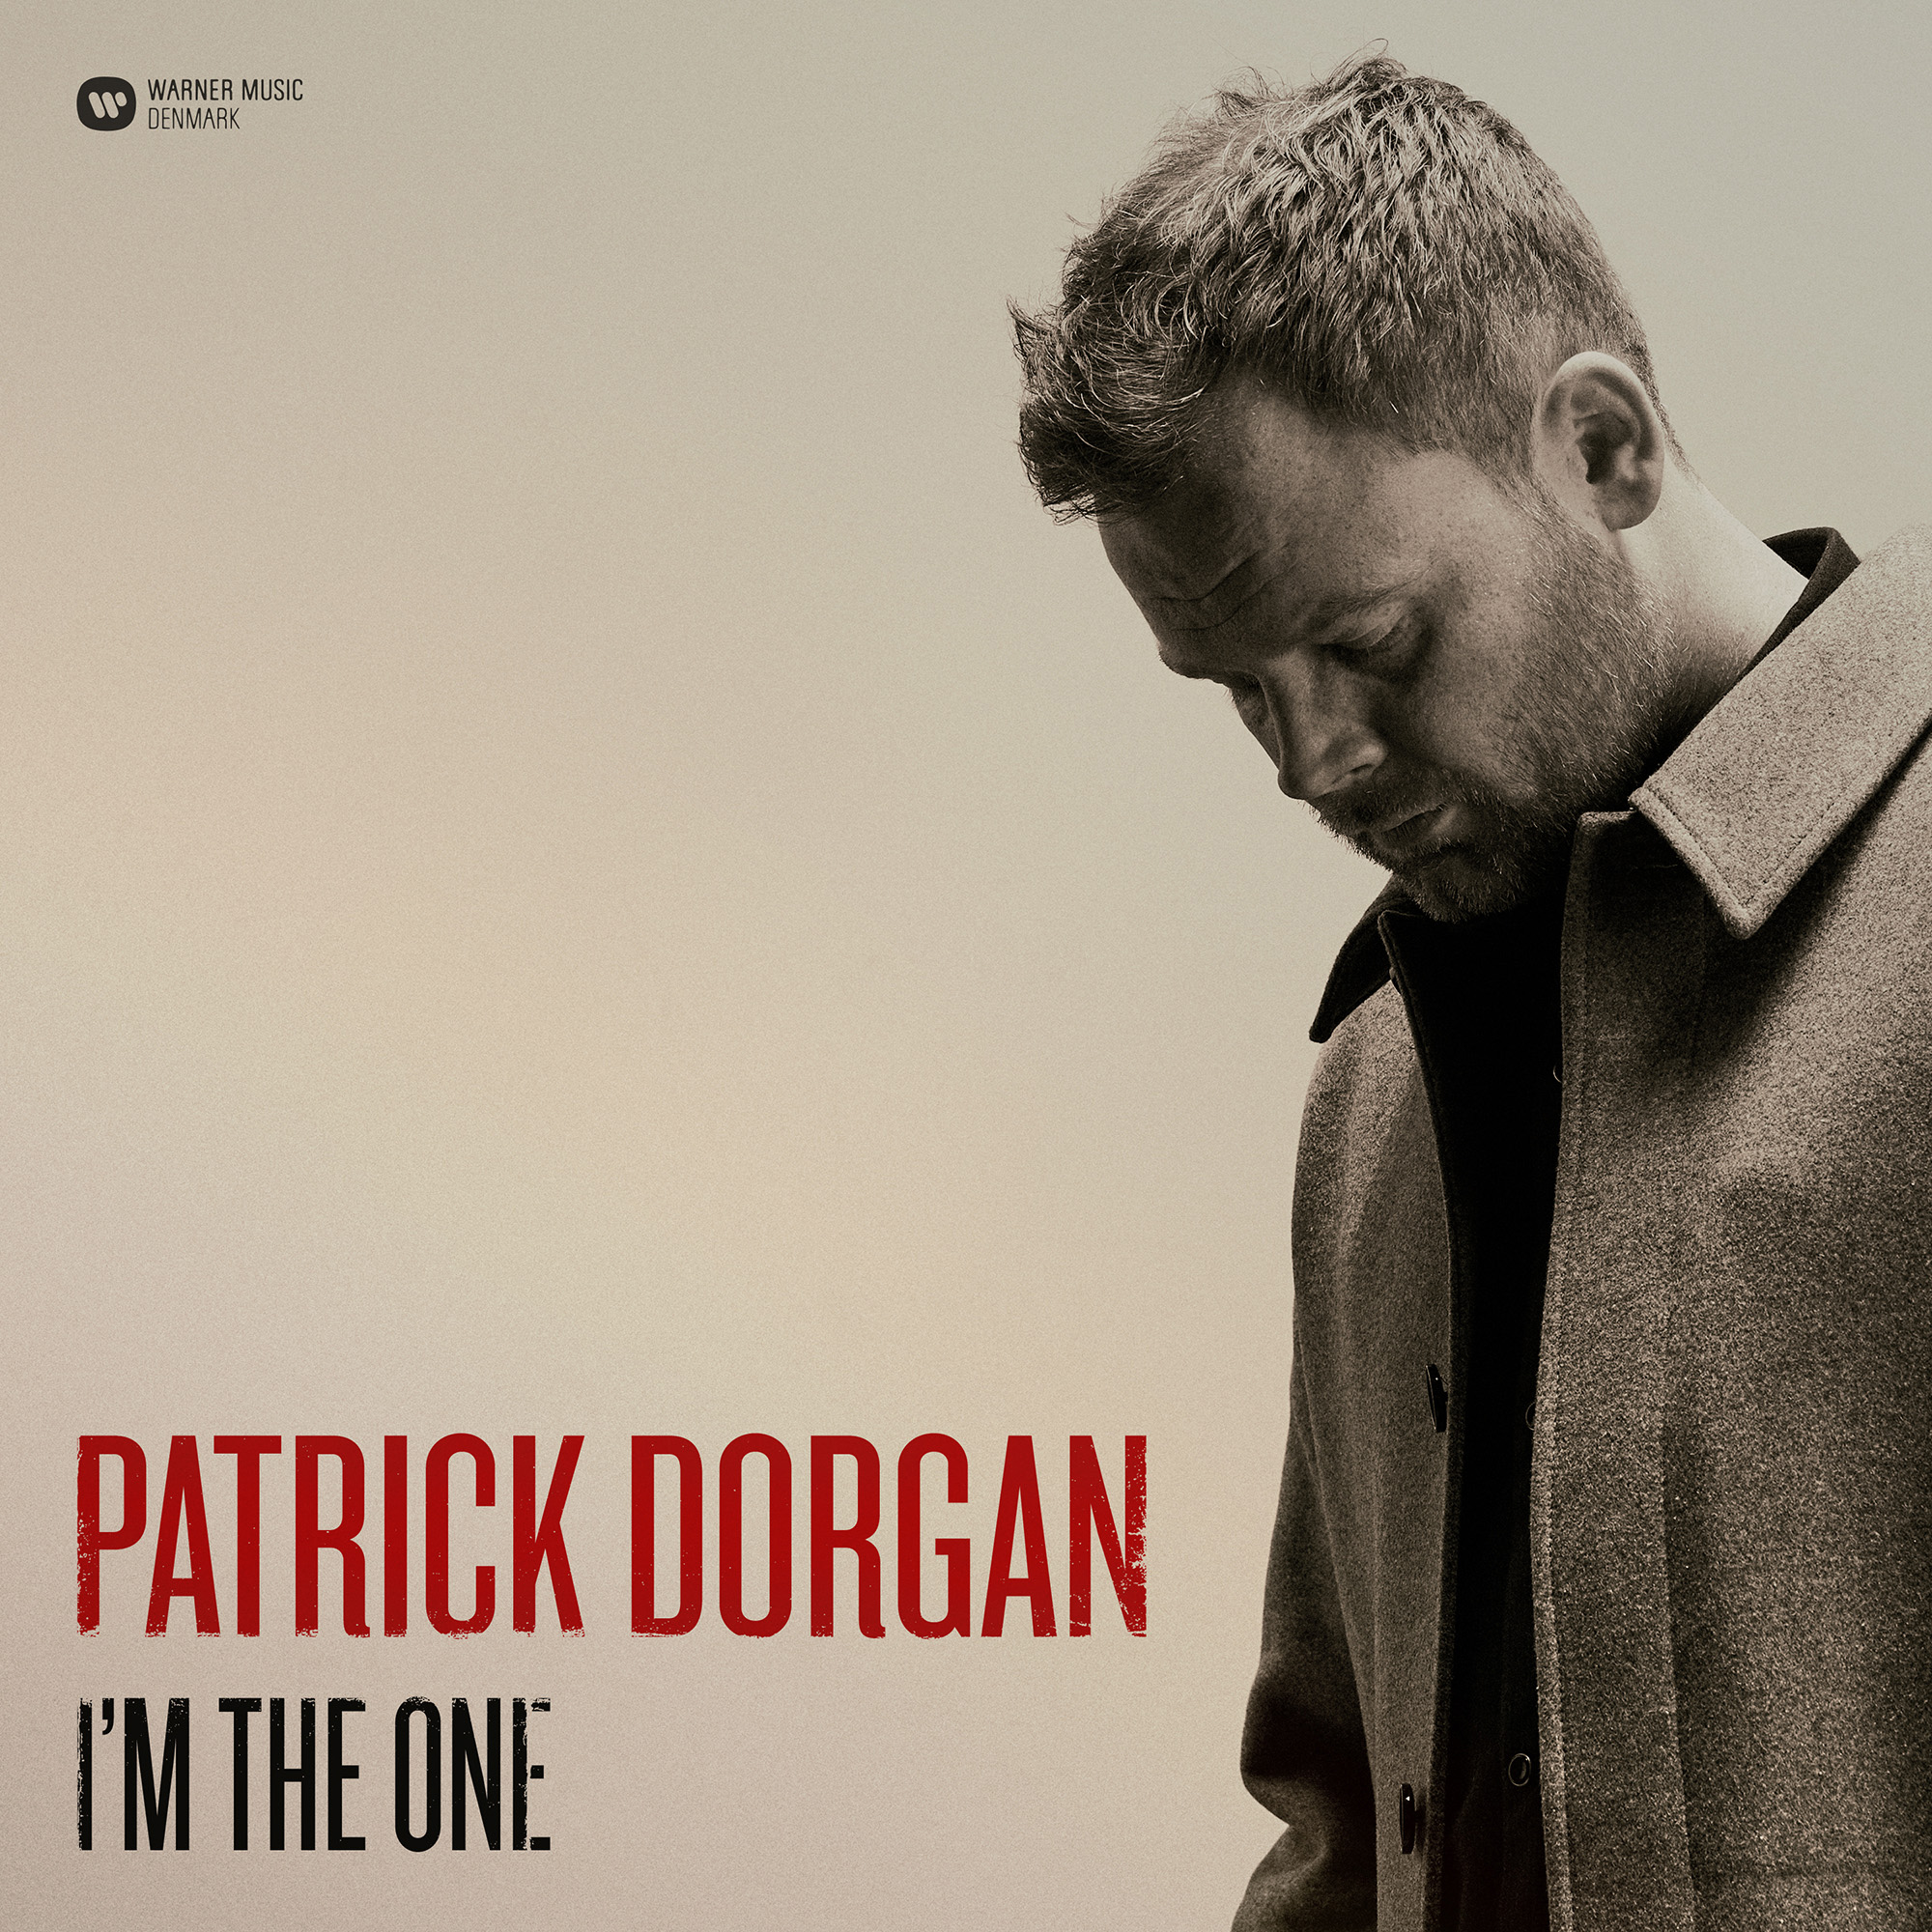 Cover for ‚I’m The One‘ by Patrick Dorgan